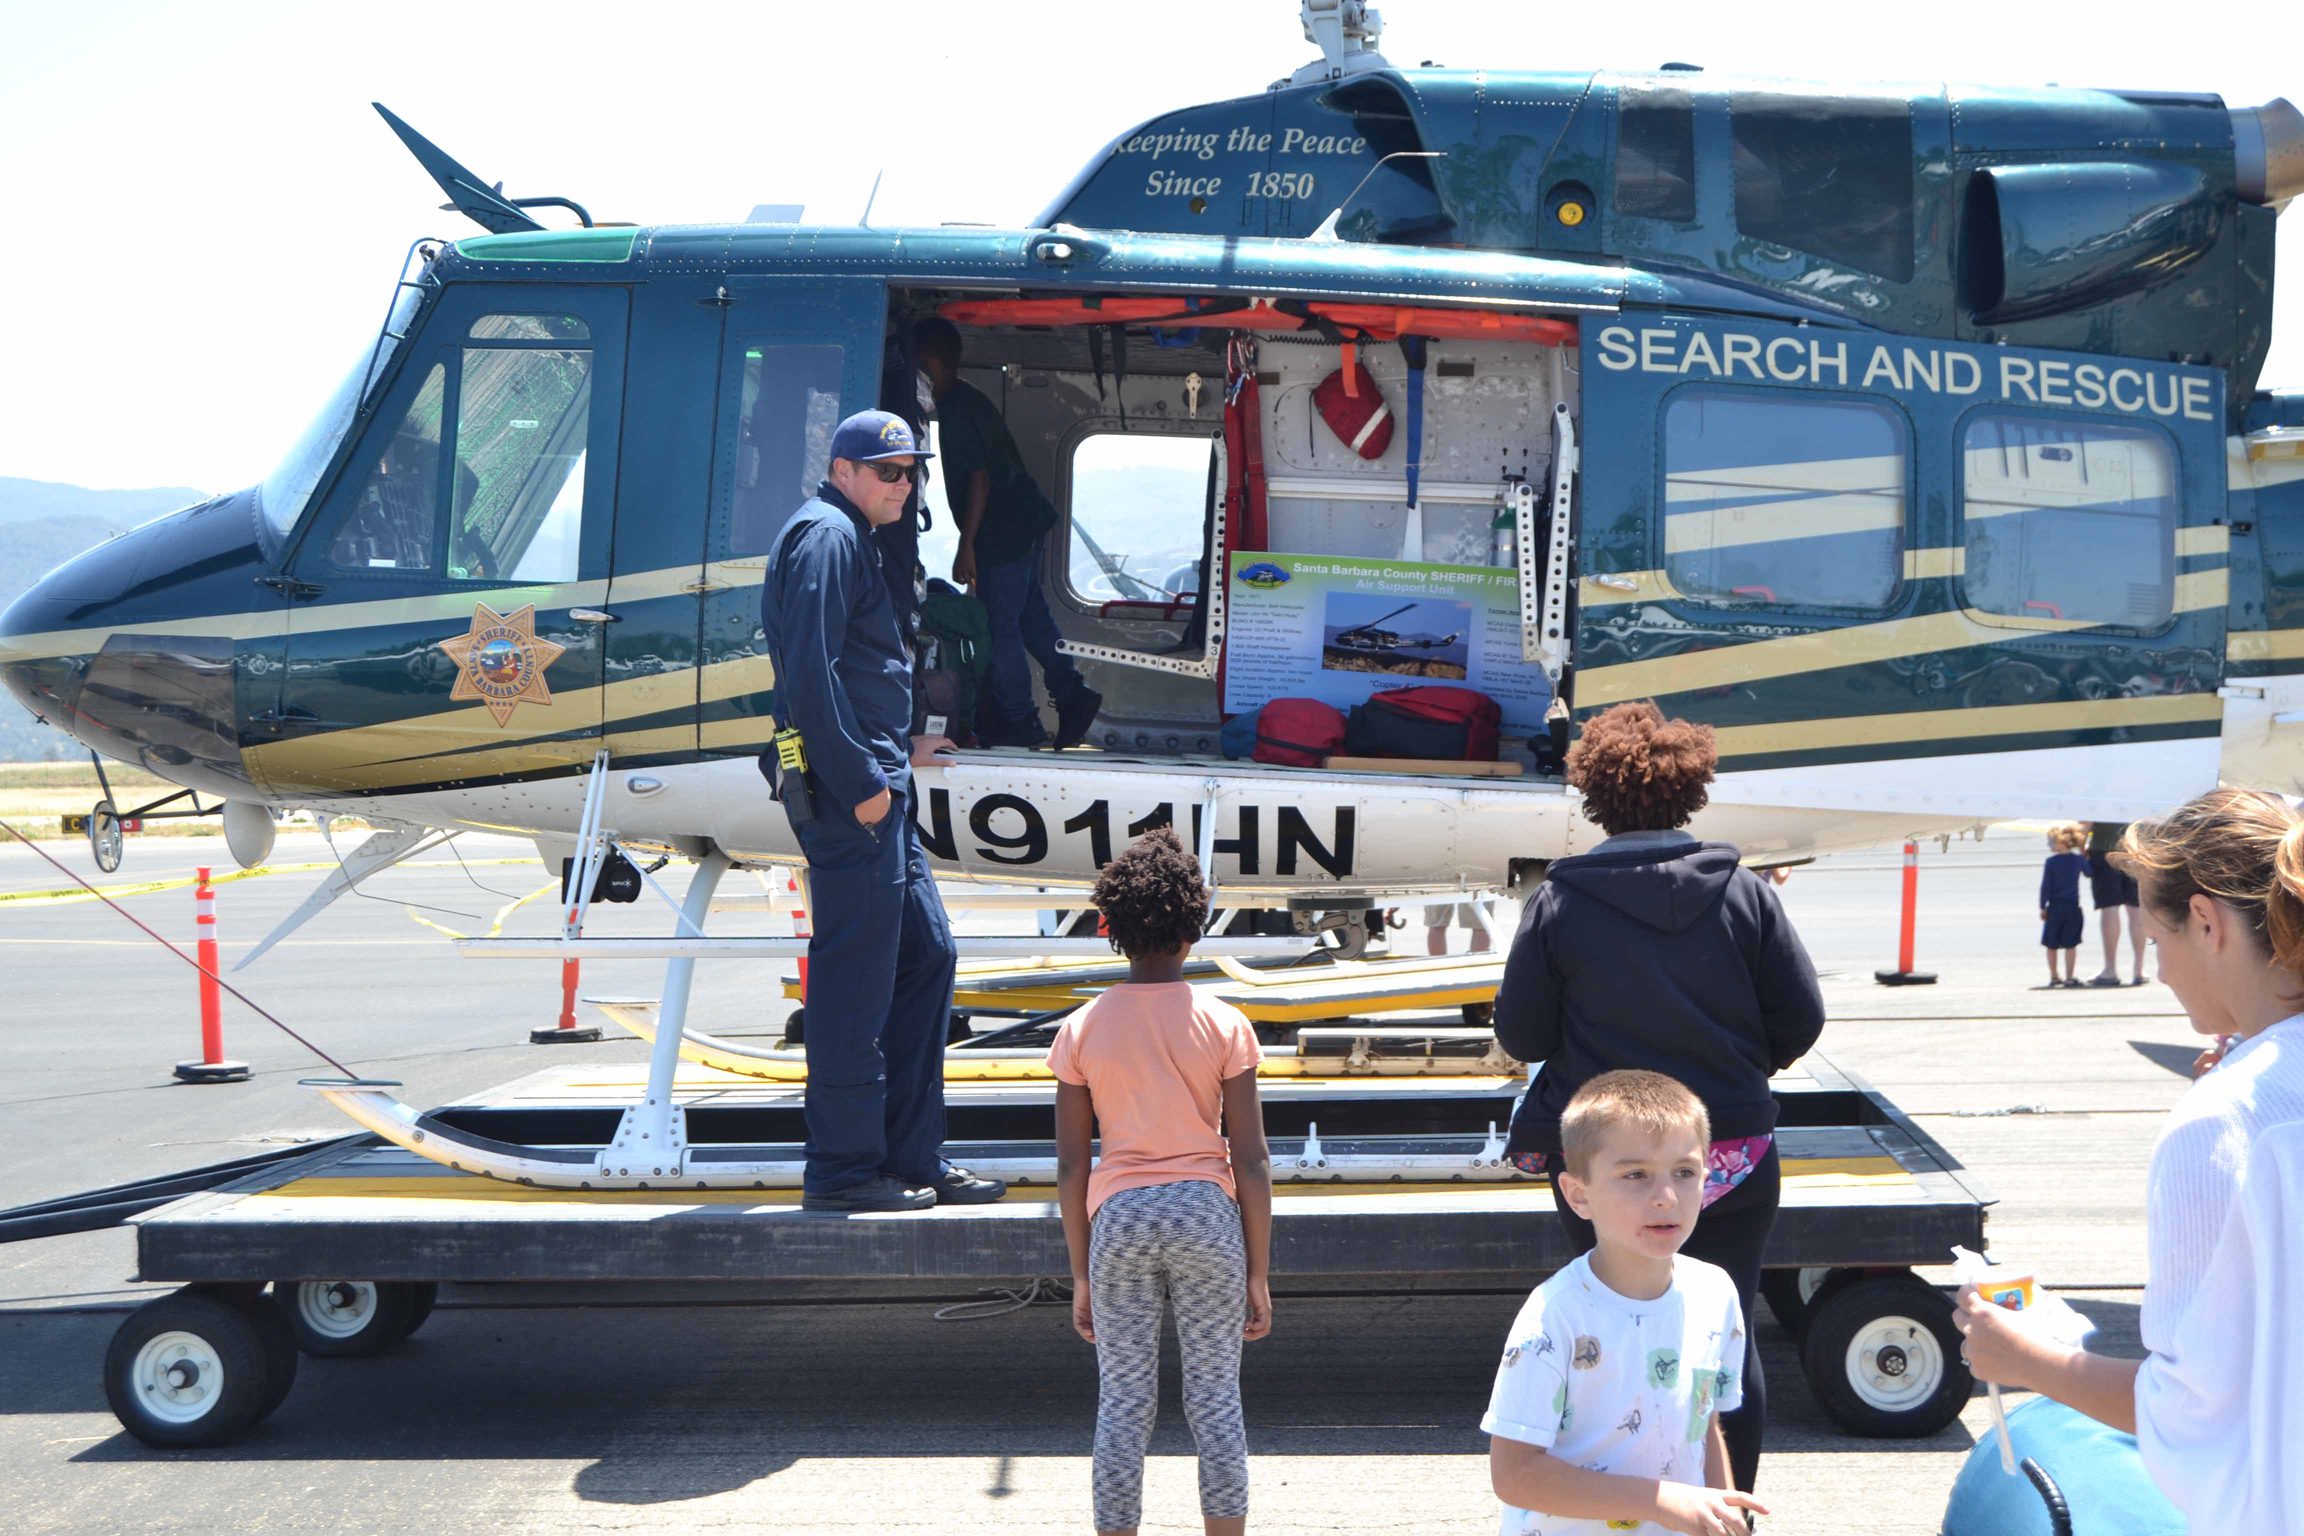 Airport Day teaches kids to soar, launches some careers